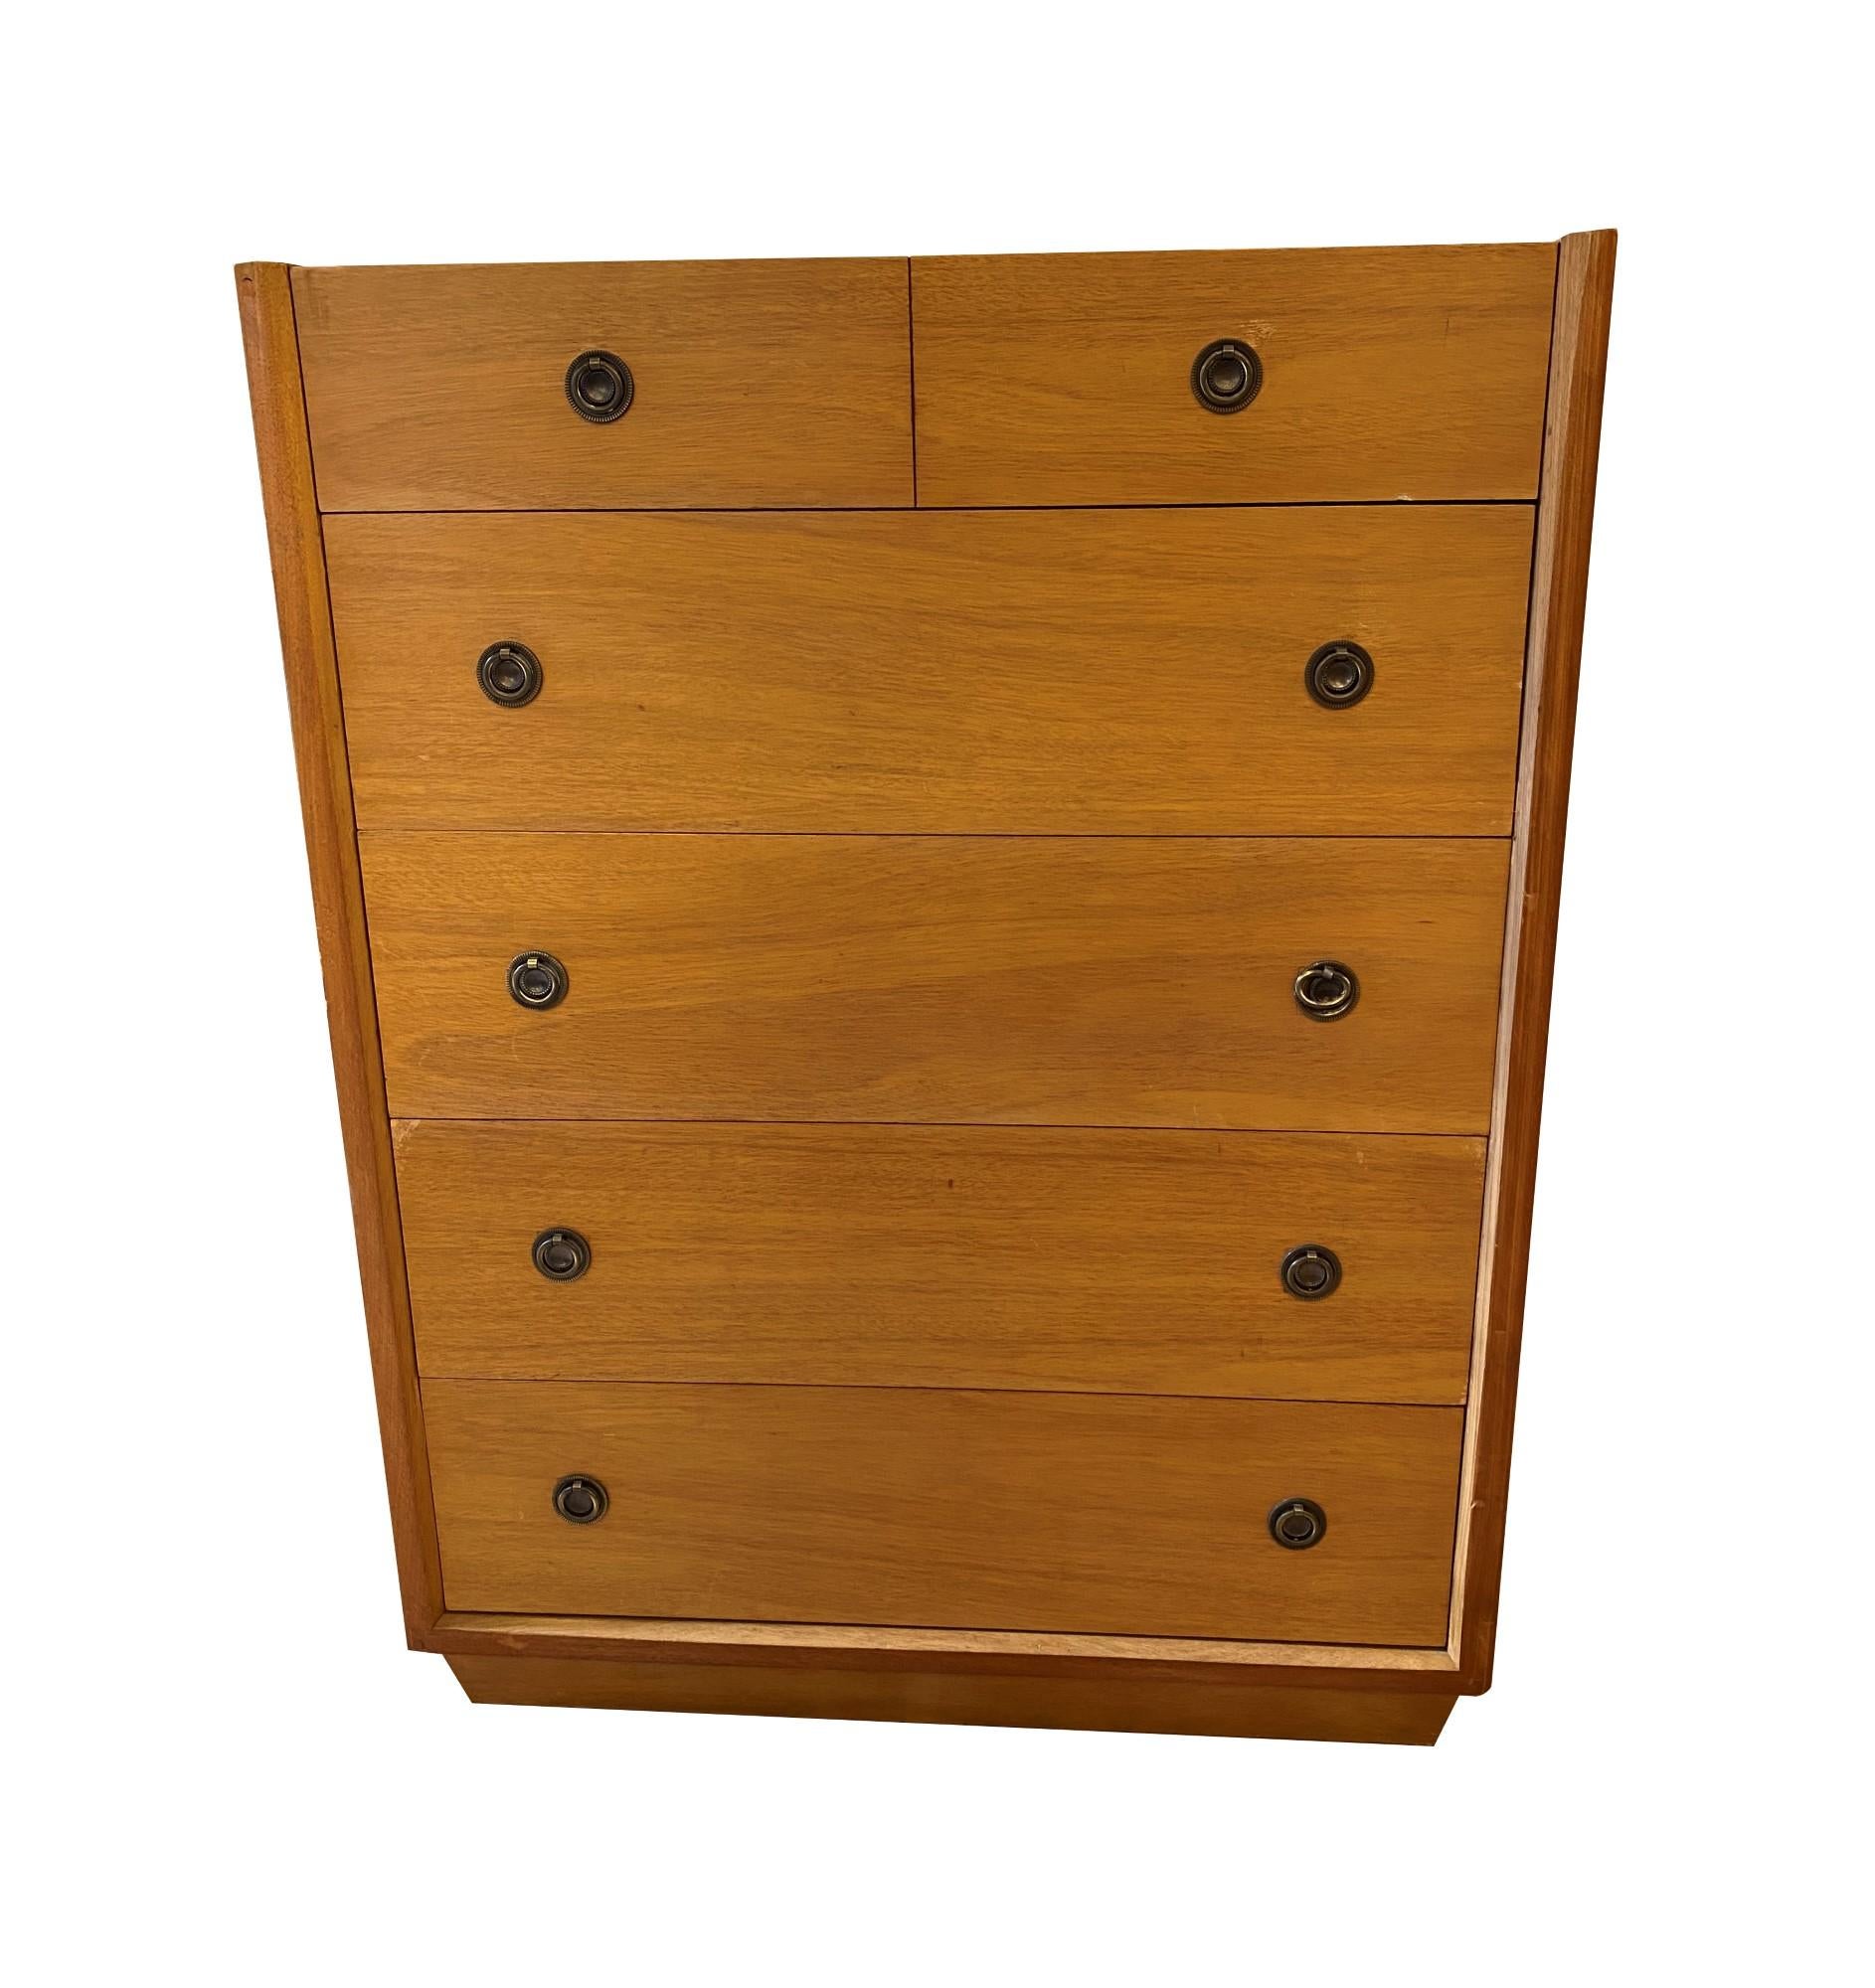 Mid-Century Modern 5 drawer wood dresser with a blond finish. Manufactured by American of Martinsville. Some veneer damage, one pull has a slightly different bale. This can be seen at our 333 West 52nd St location in the Theater District West of